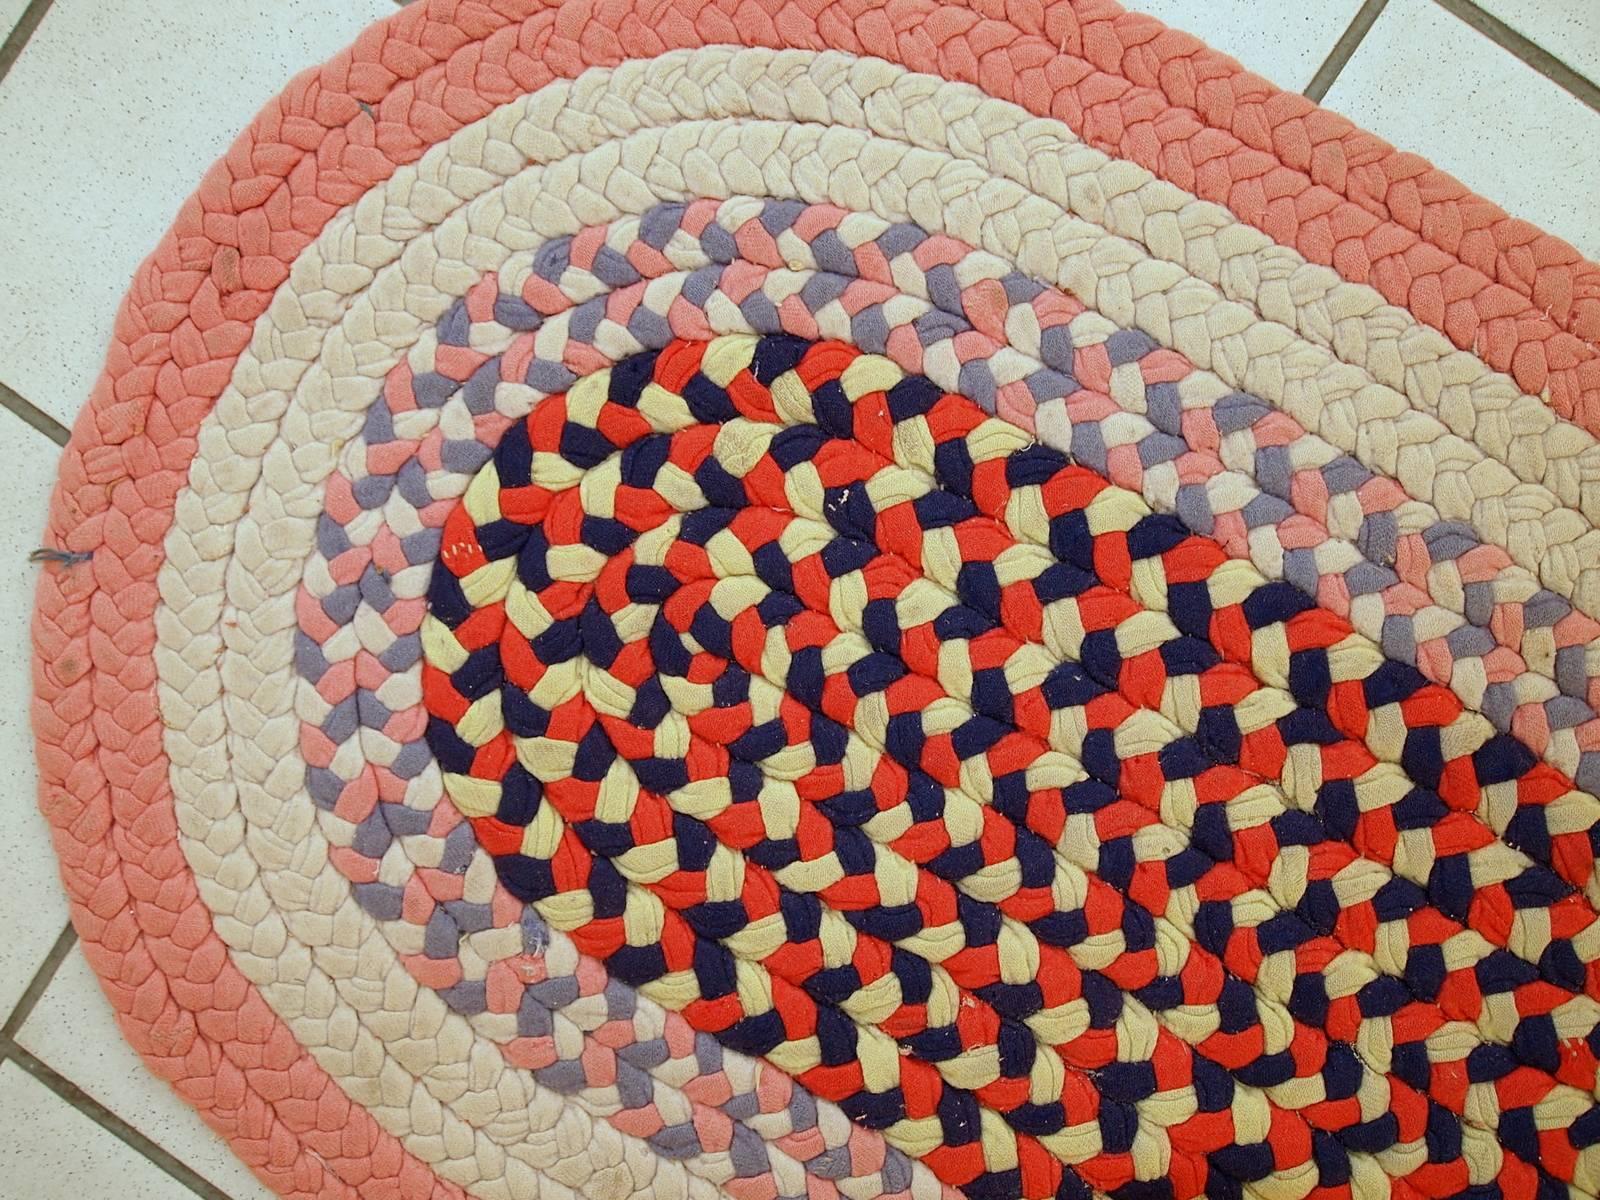 Antique handmade American braided rug in original condition. Very Classic American rug made out of cotton stripes in beige, red and rose shades.